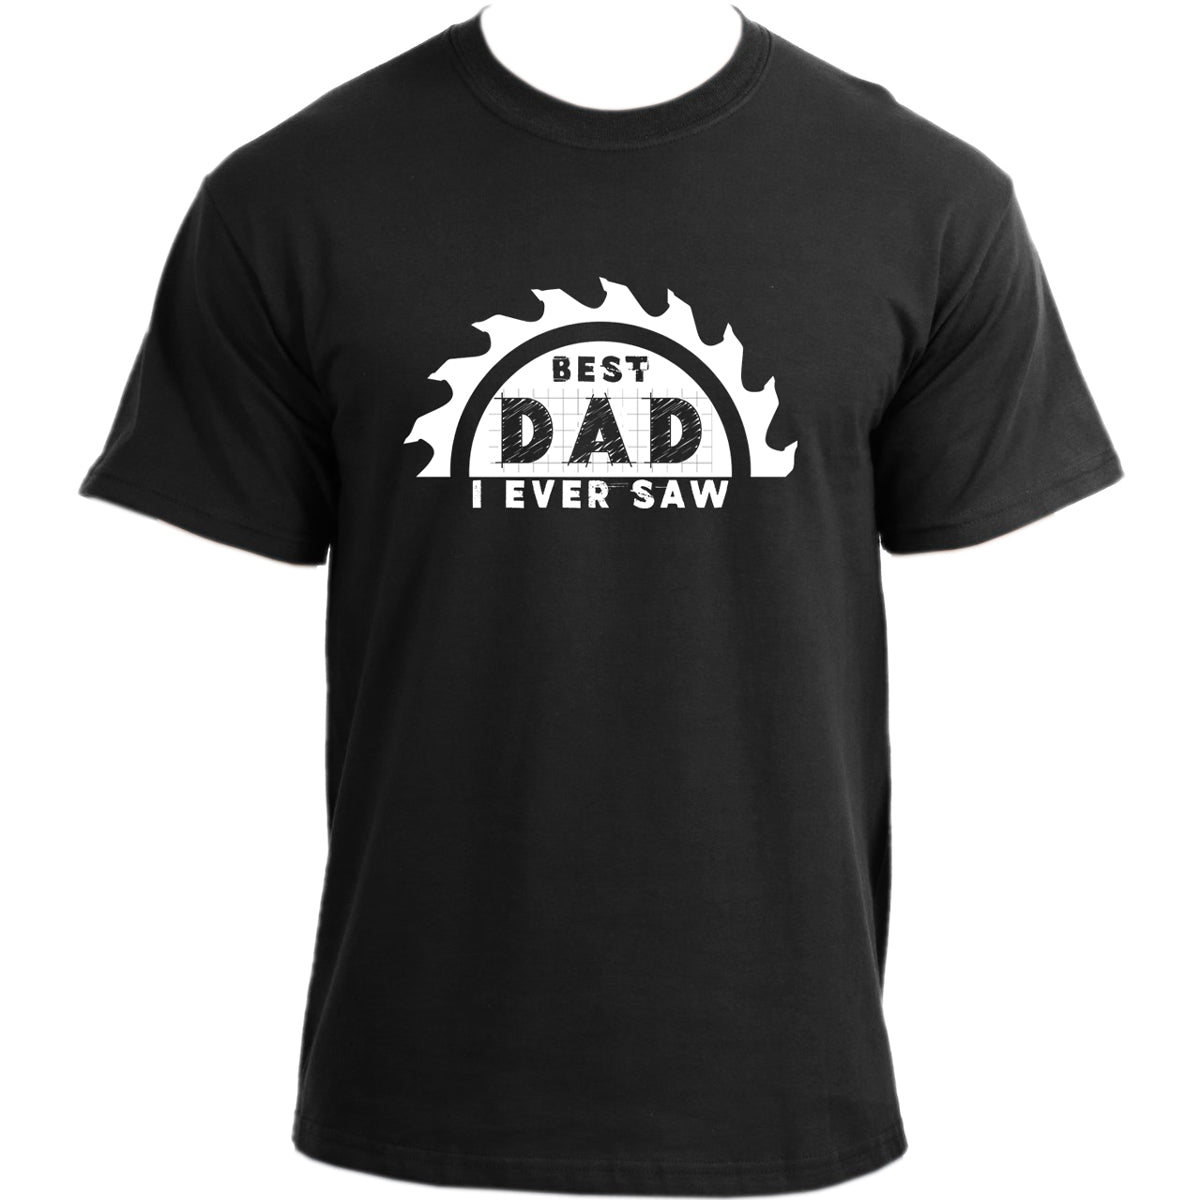 Best Dad I Ever Saw T-Shirt I Funny Carpenter Dad Joke Shirt I Fathers Day Gift for Dad